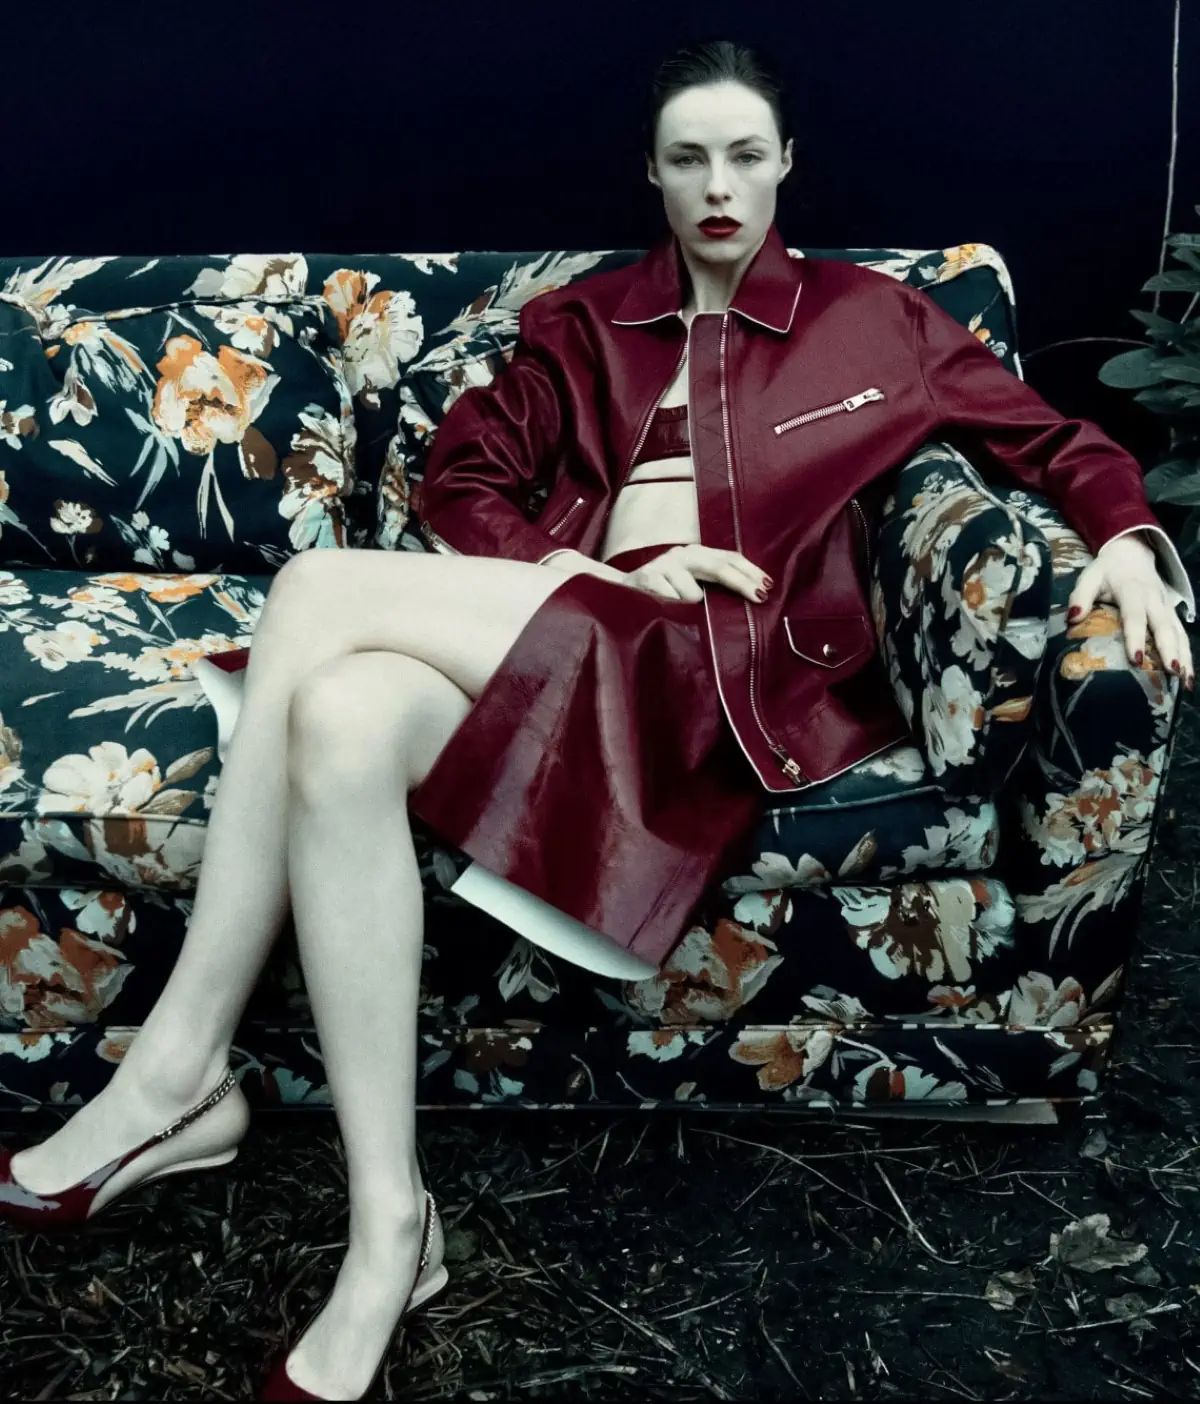 Gucci Burgundy Leather jacket, bra and skirt, patent leather pumps Fashion Editorials